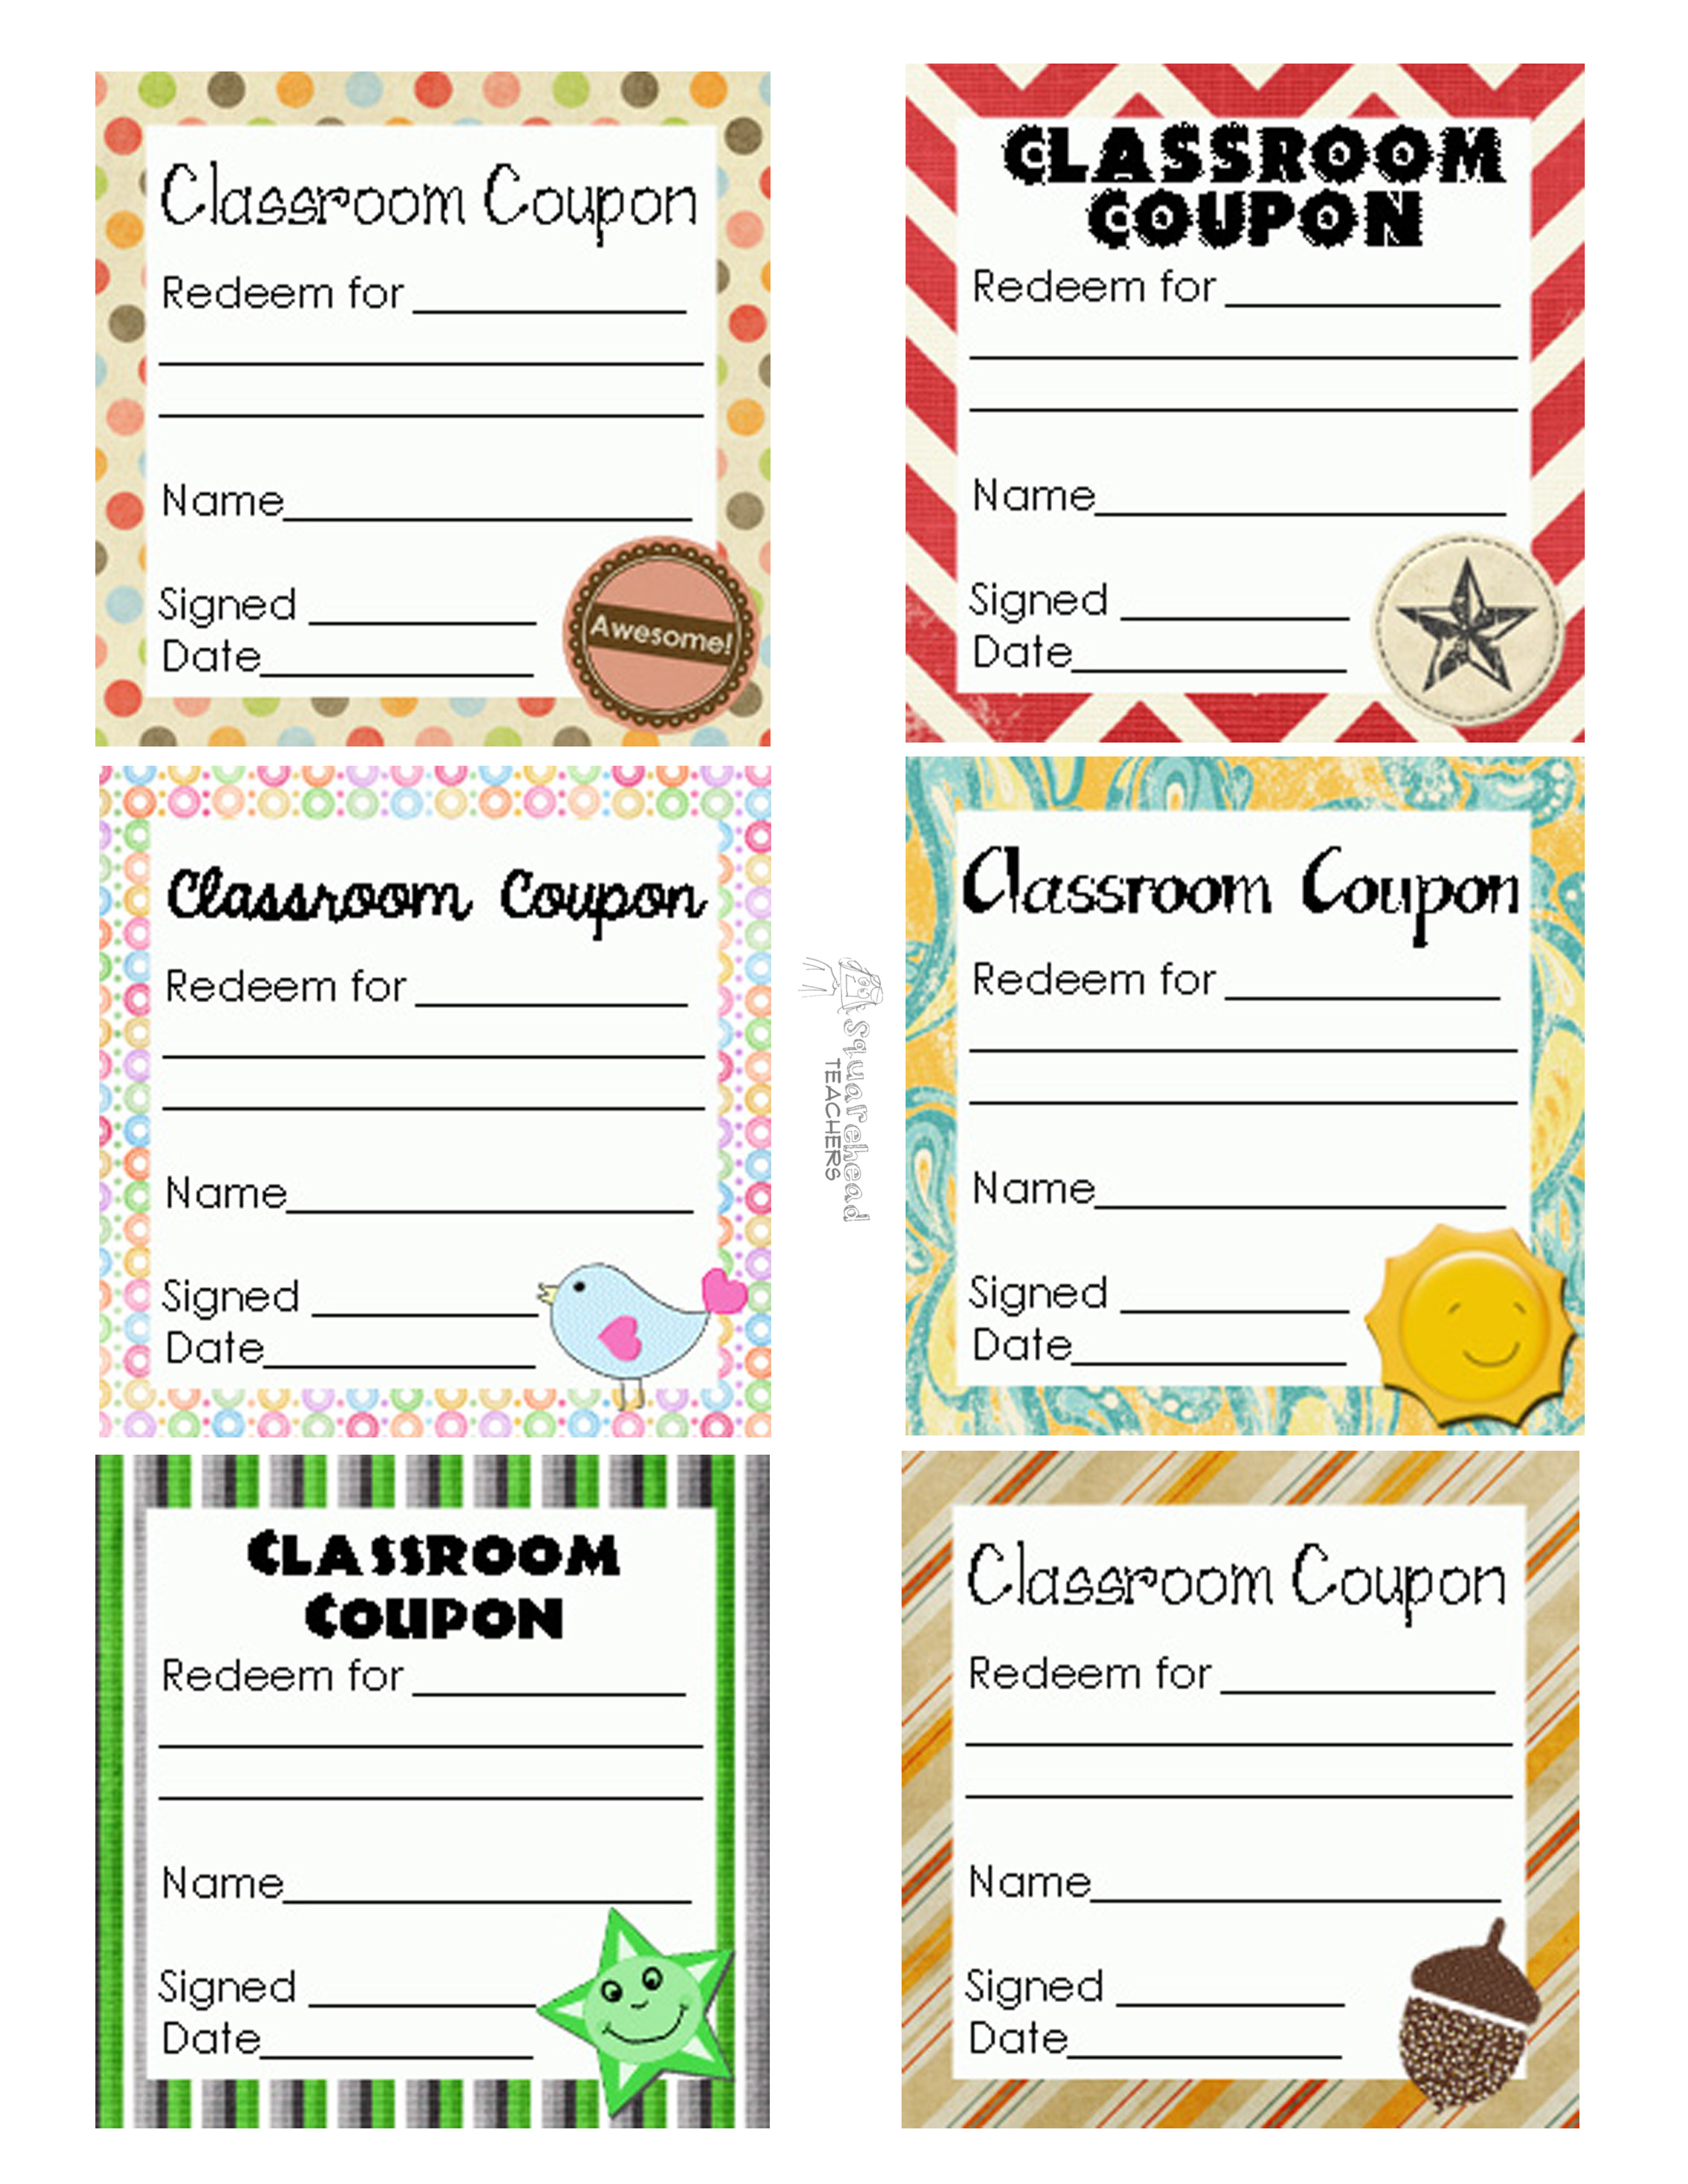 classroom-coupons-updated-squarehead-teachers